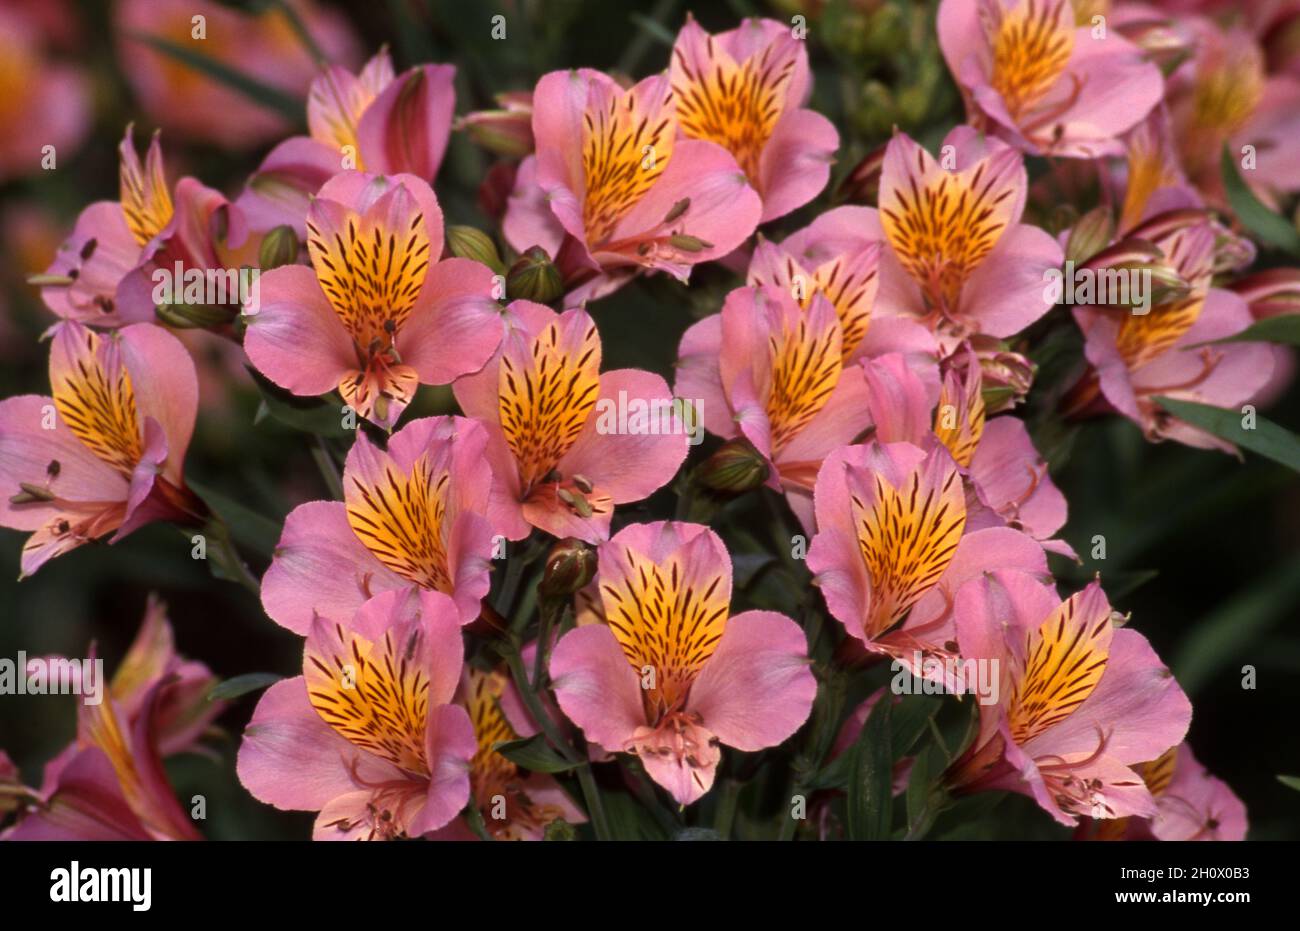 BEAUTIFUL PINK ALSTROEMERIA FLOWERS (KNOWN AS PERUVIAN OR CHILEAN LILIES  Stock Photo - Alamy